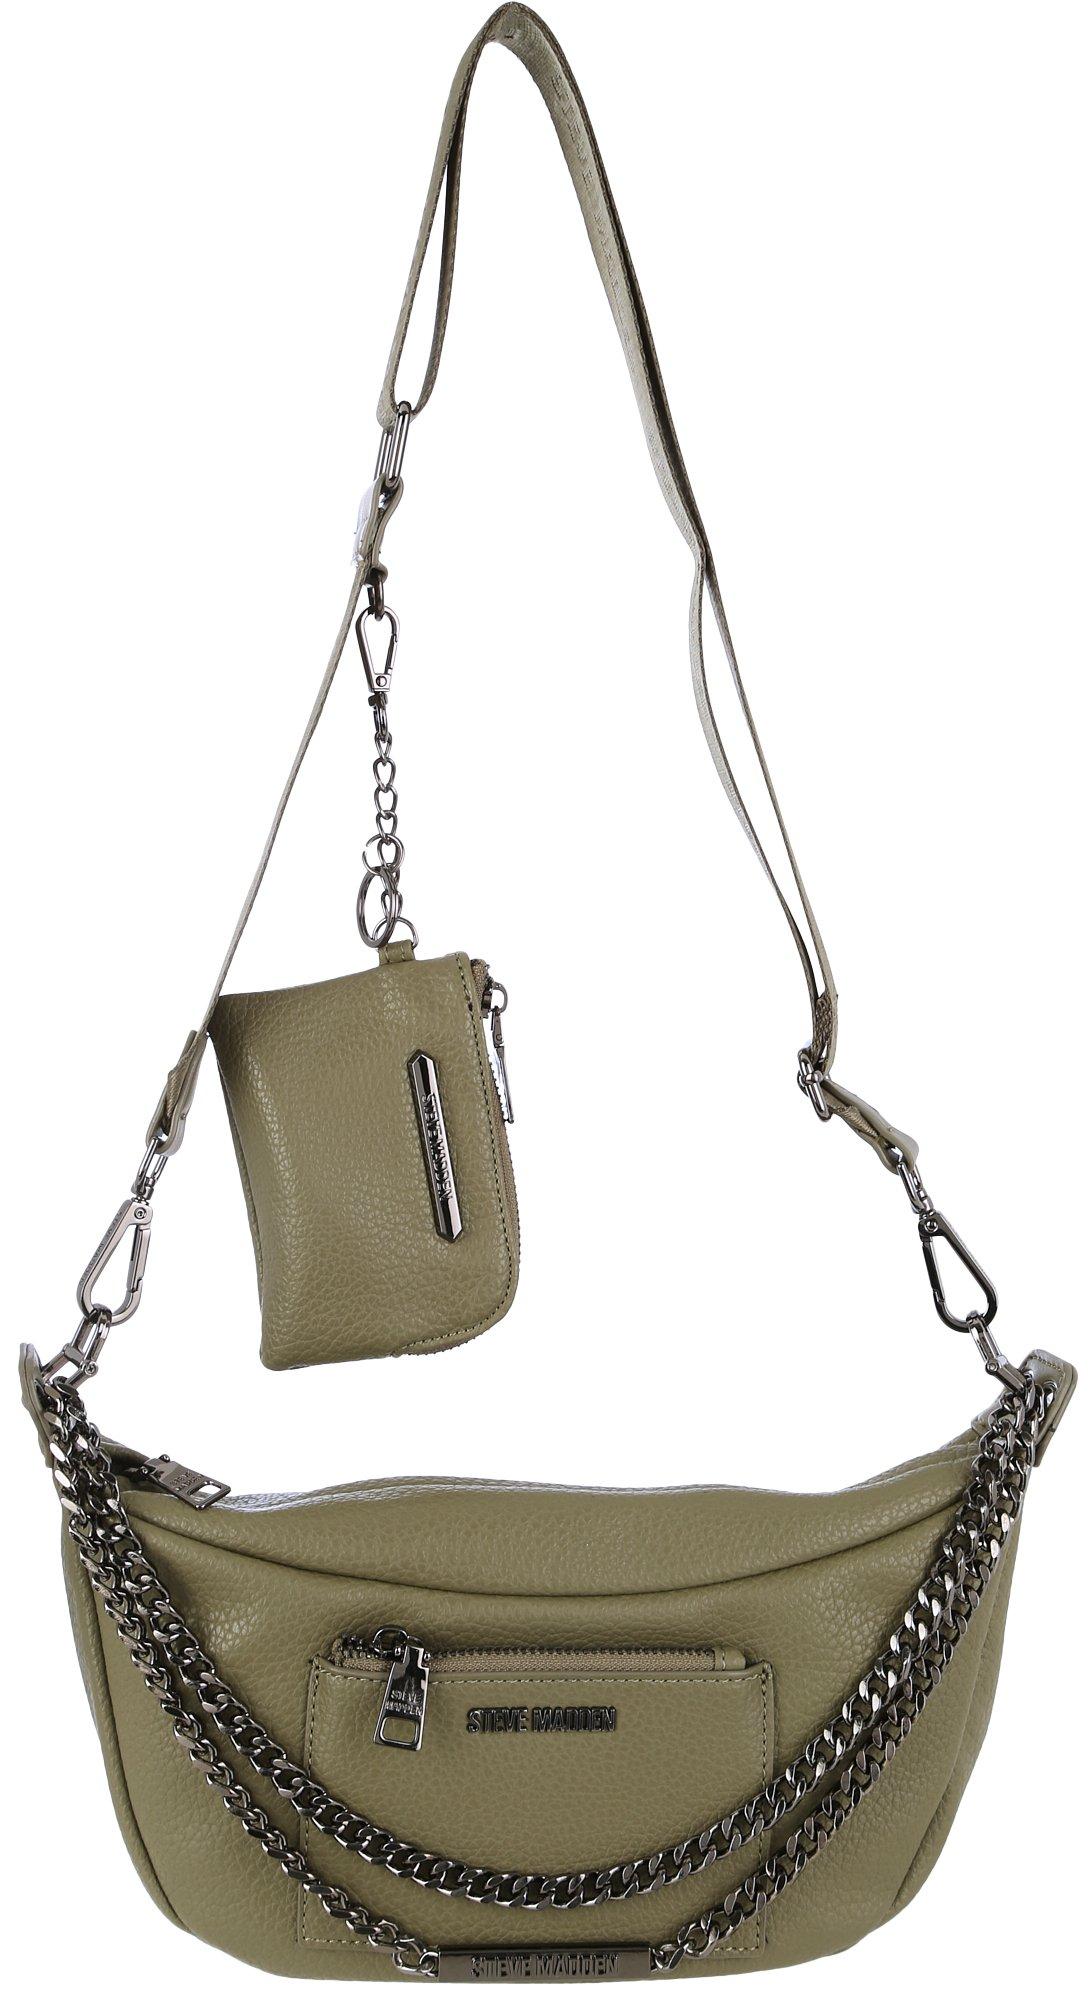 Vegan Leather Cross Body Sling Bag Olive Green by Fnp | Send Gifts Online